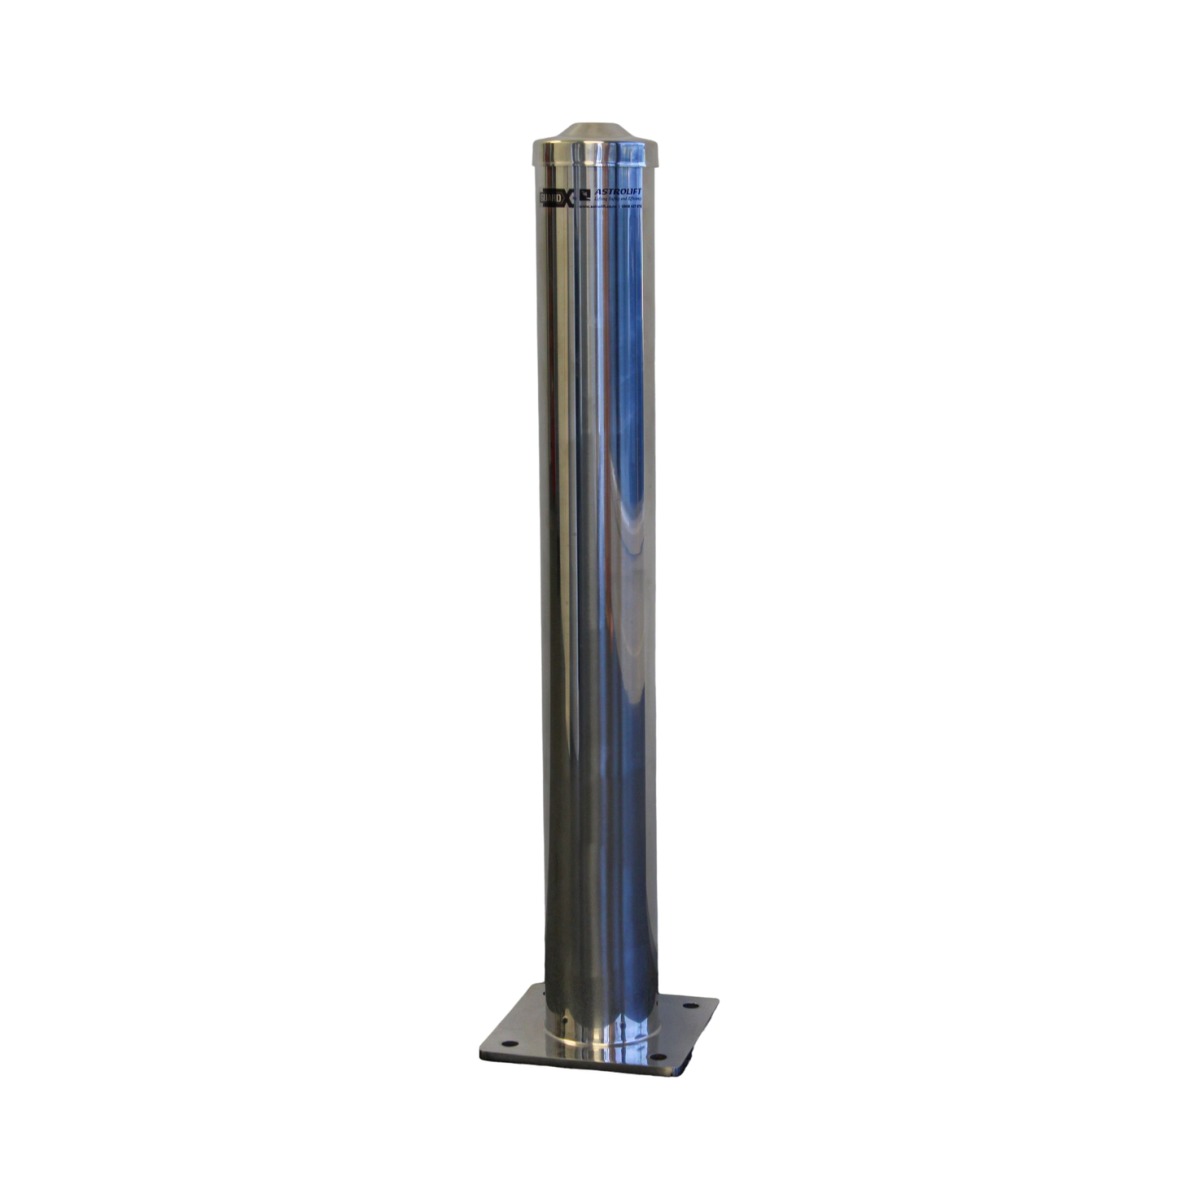 Buy Stainless Steel Bollard in Bolt-down Bollards from GuardX available at Astrolift NZ